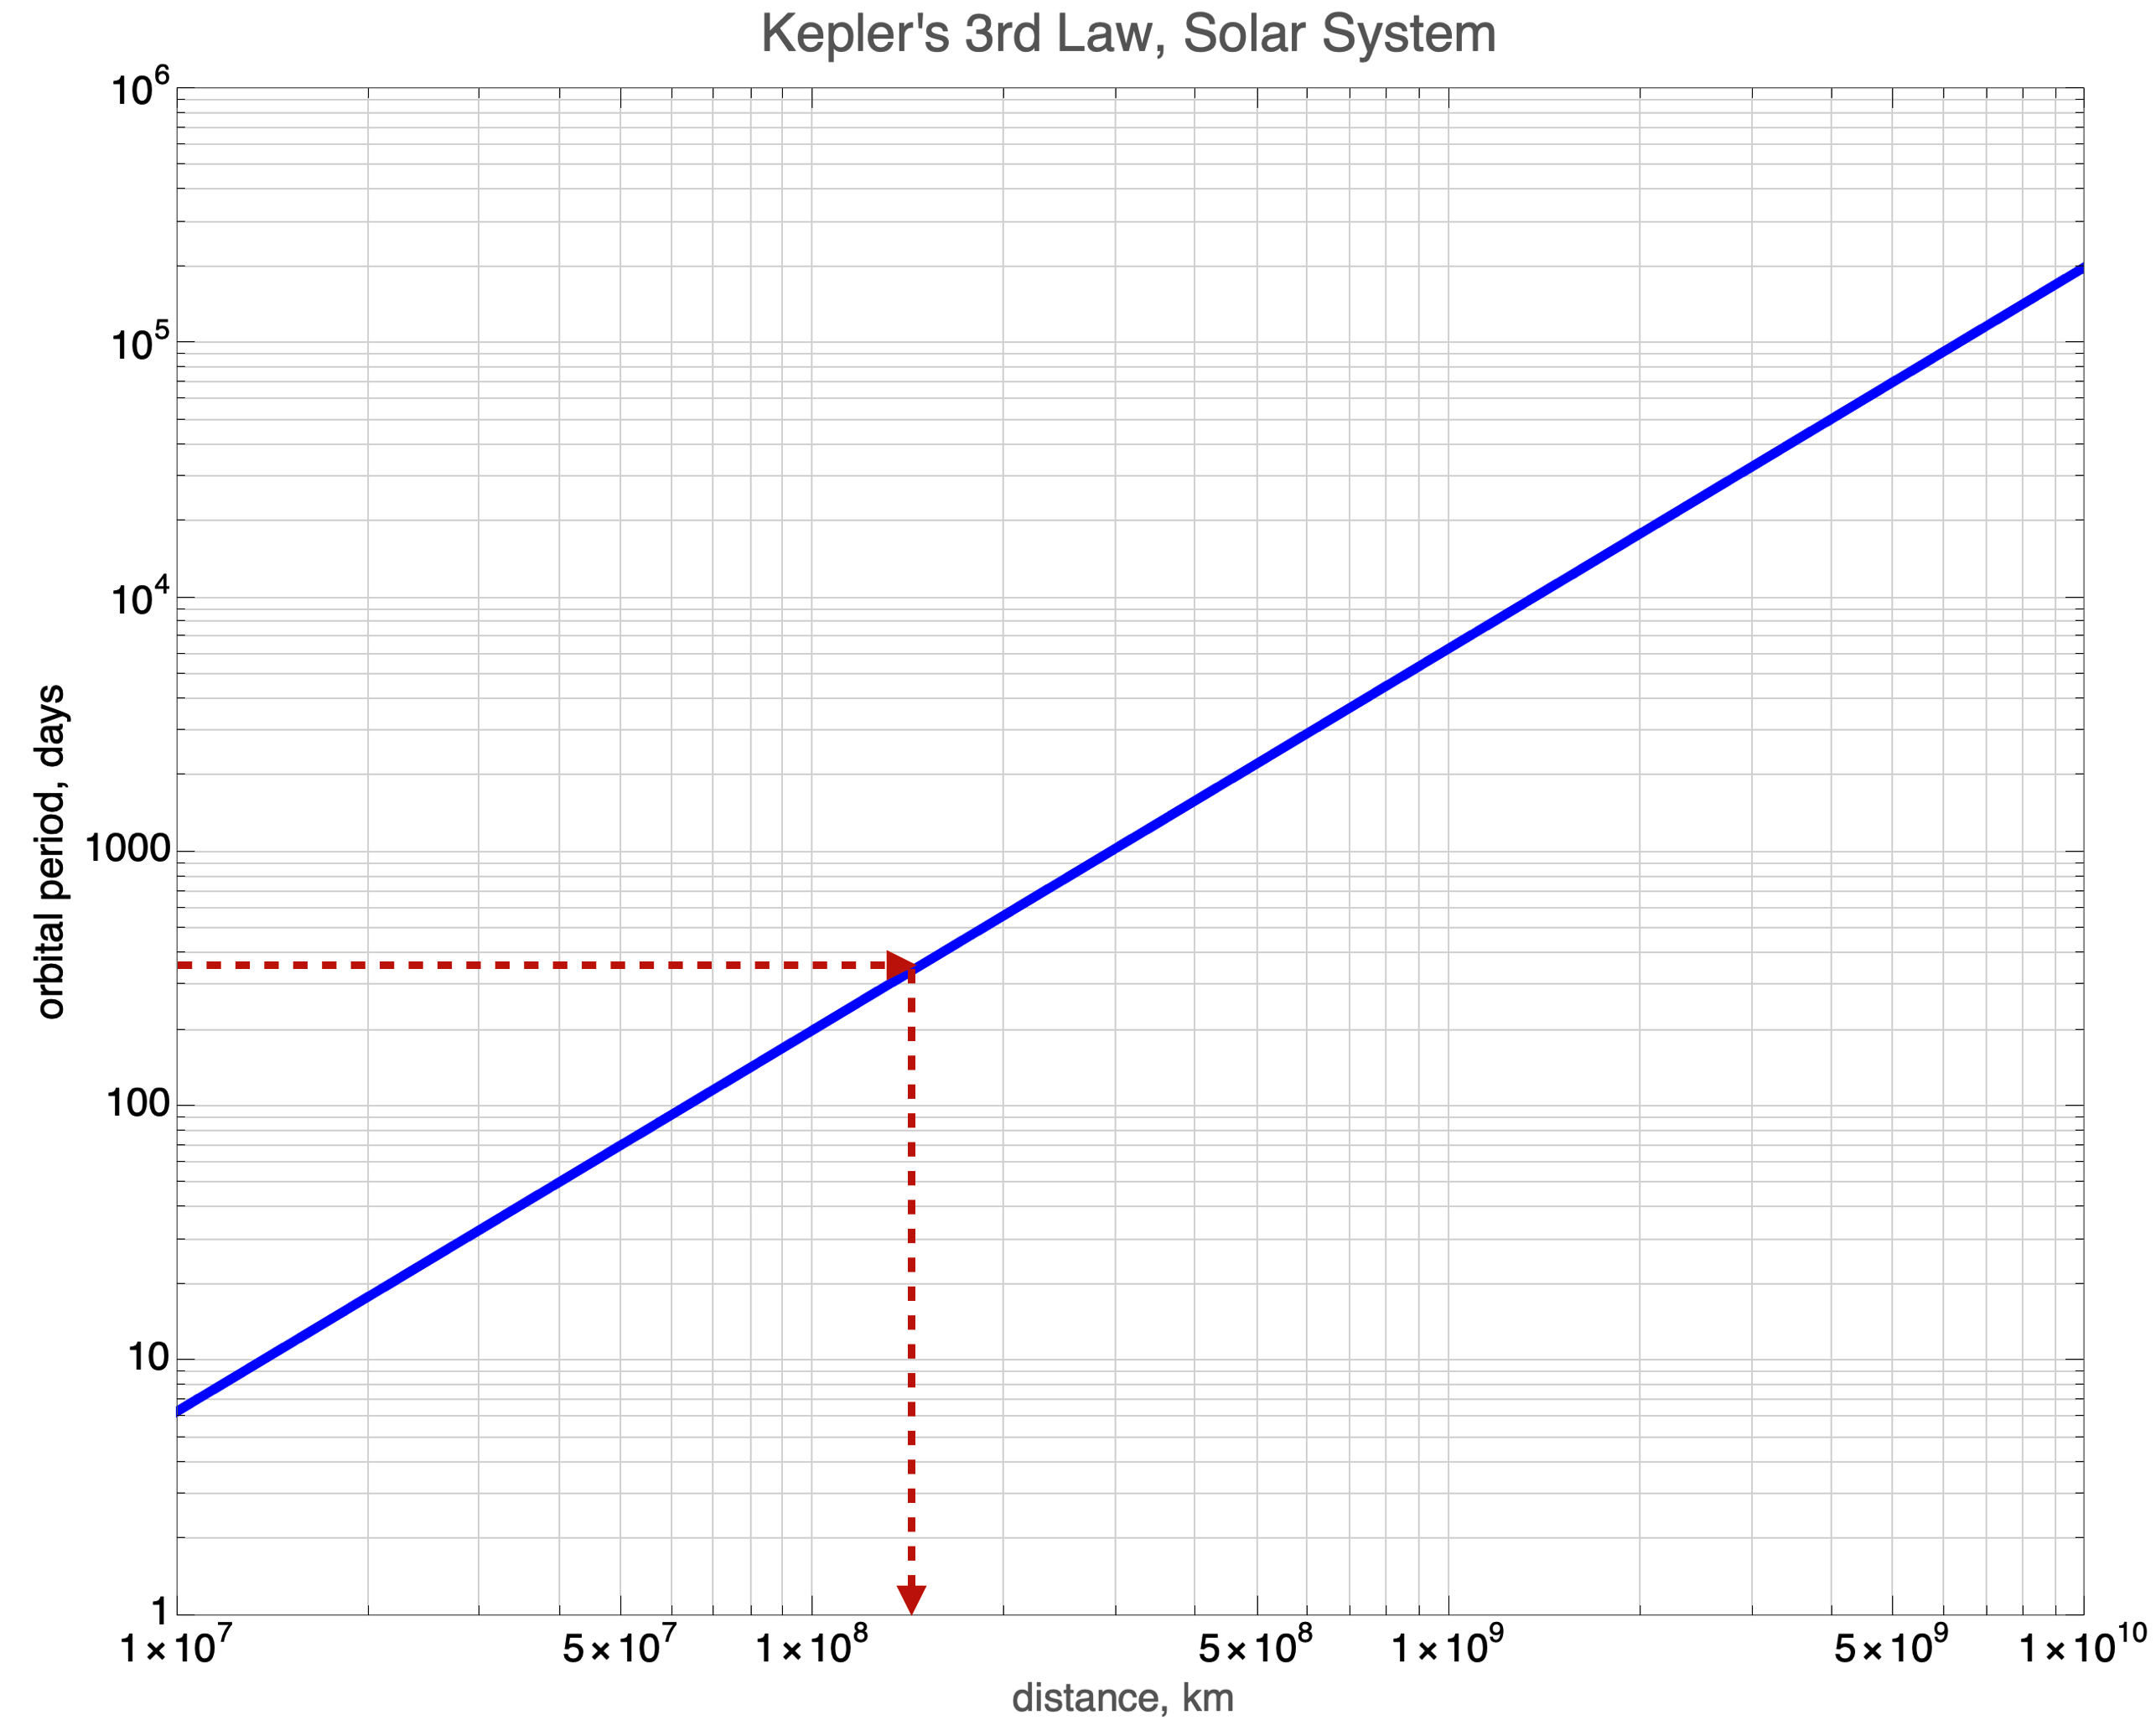 Kepler's 3rd law for anything orbiting in our solar system: the period versus the distance from our sun.